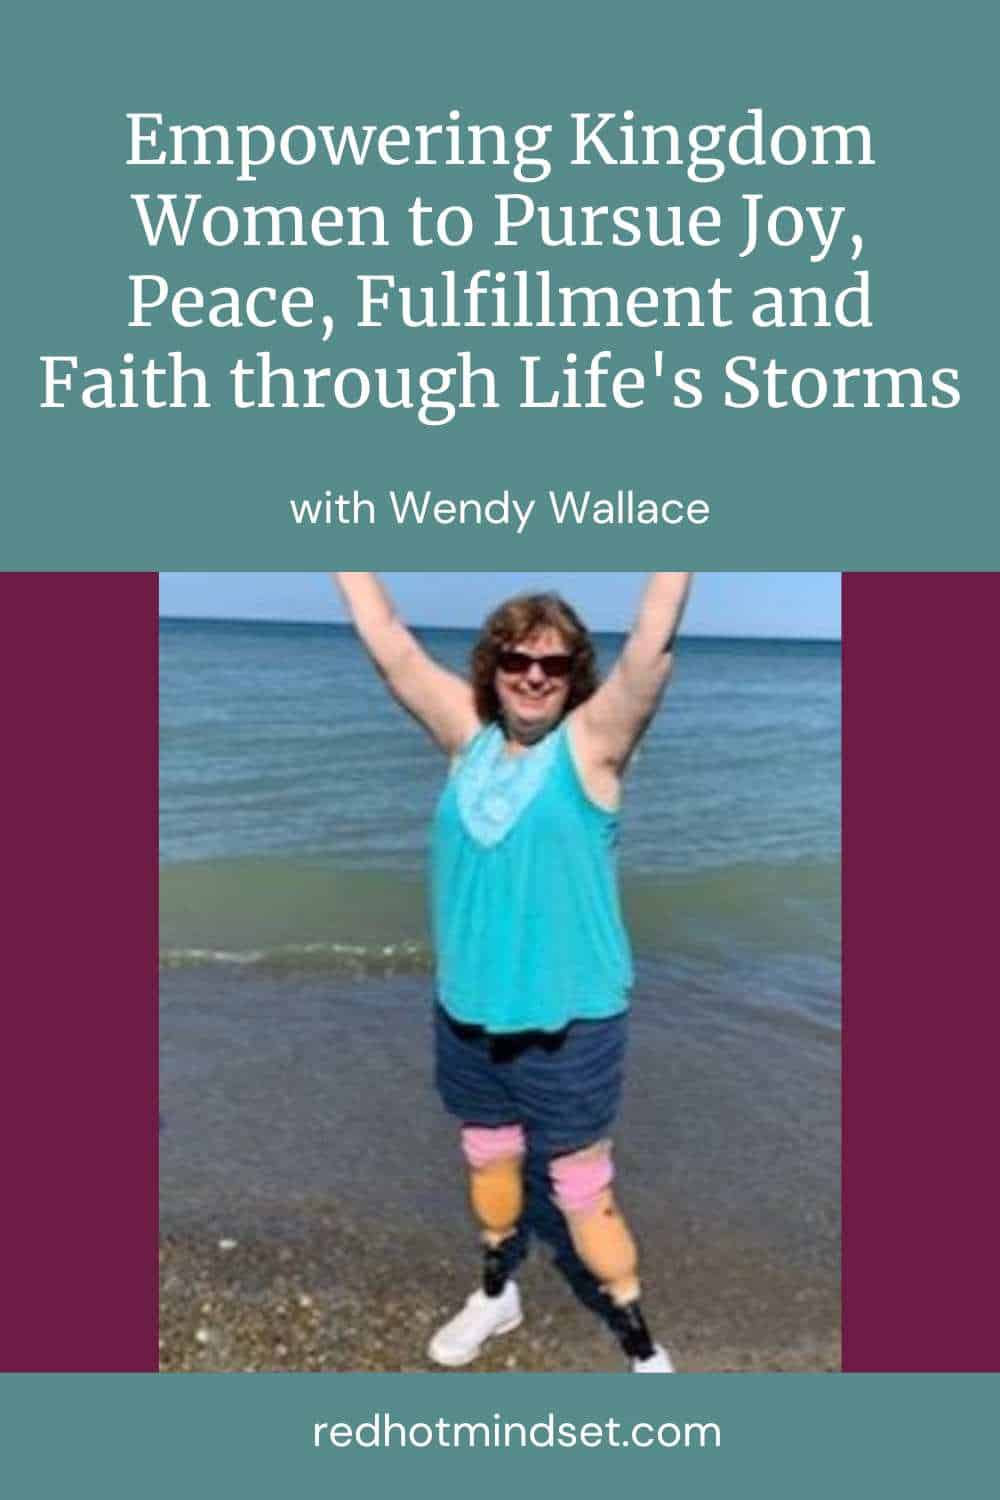 Ep 207 | Empowering Kingdom Women to Pursue Joy, Peace, Fulfillment and Faith through Life’s Storms with Wendy Wallace